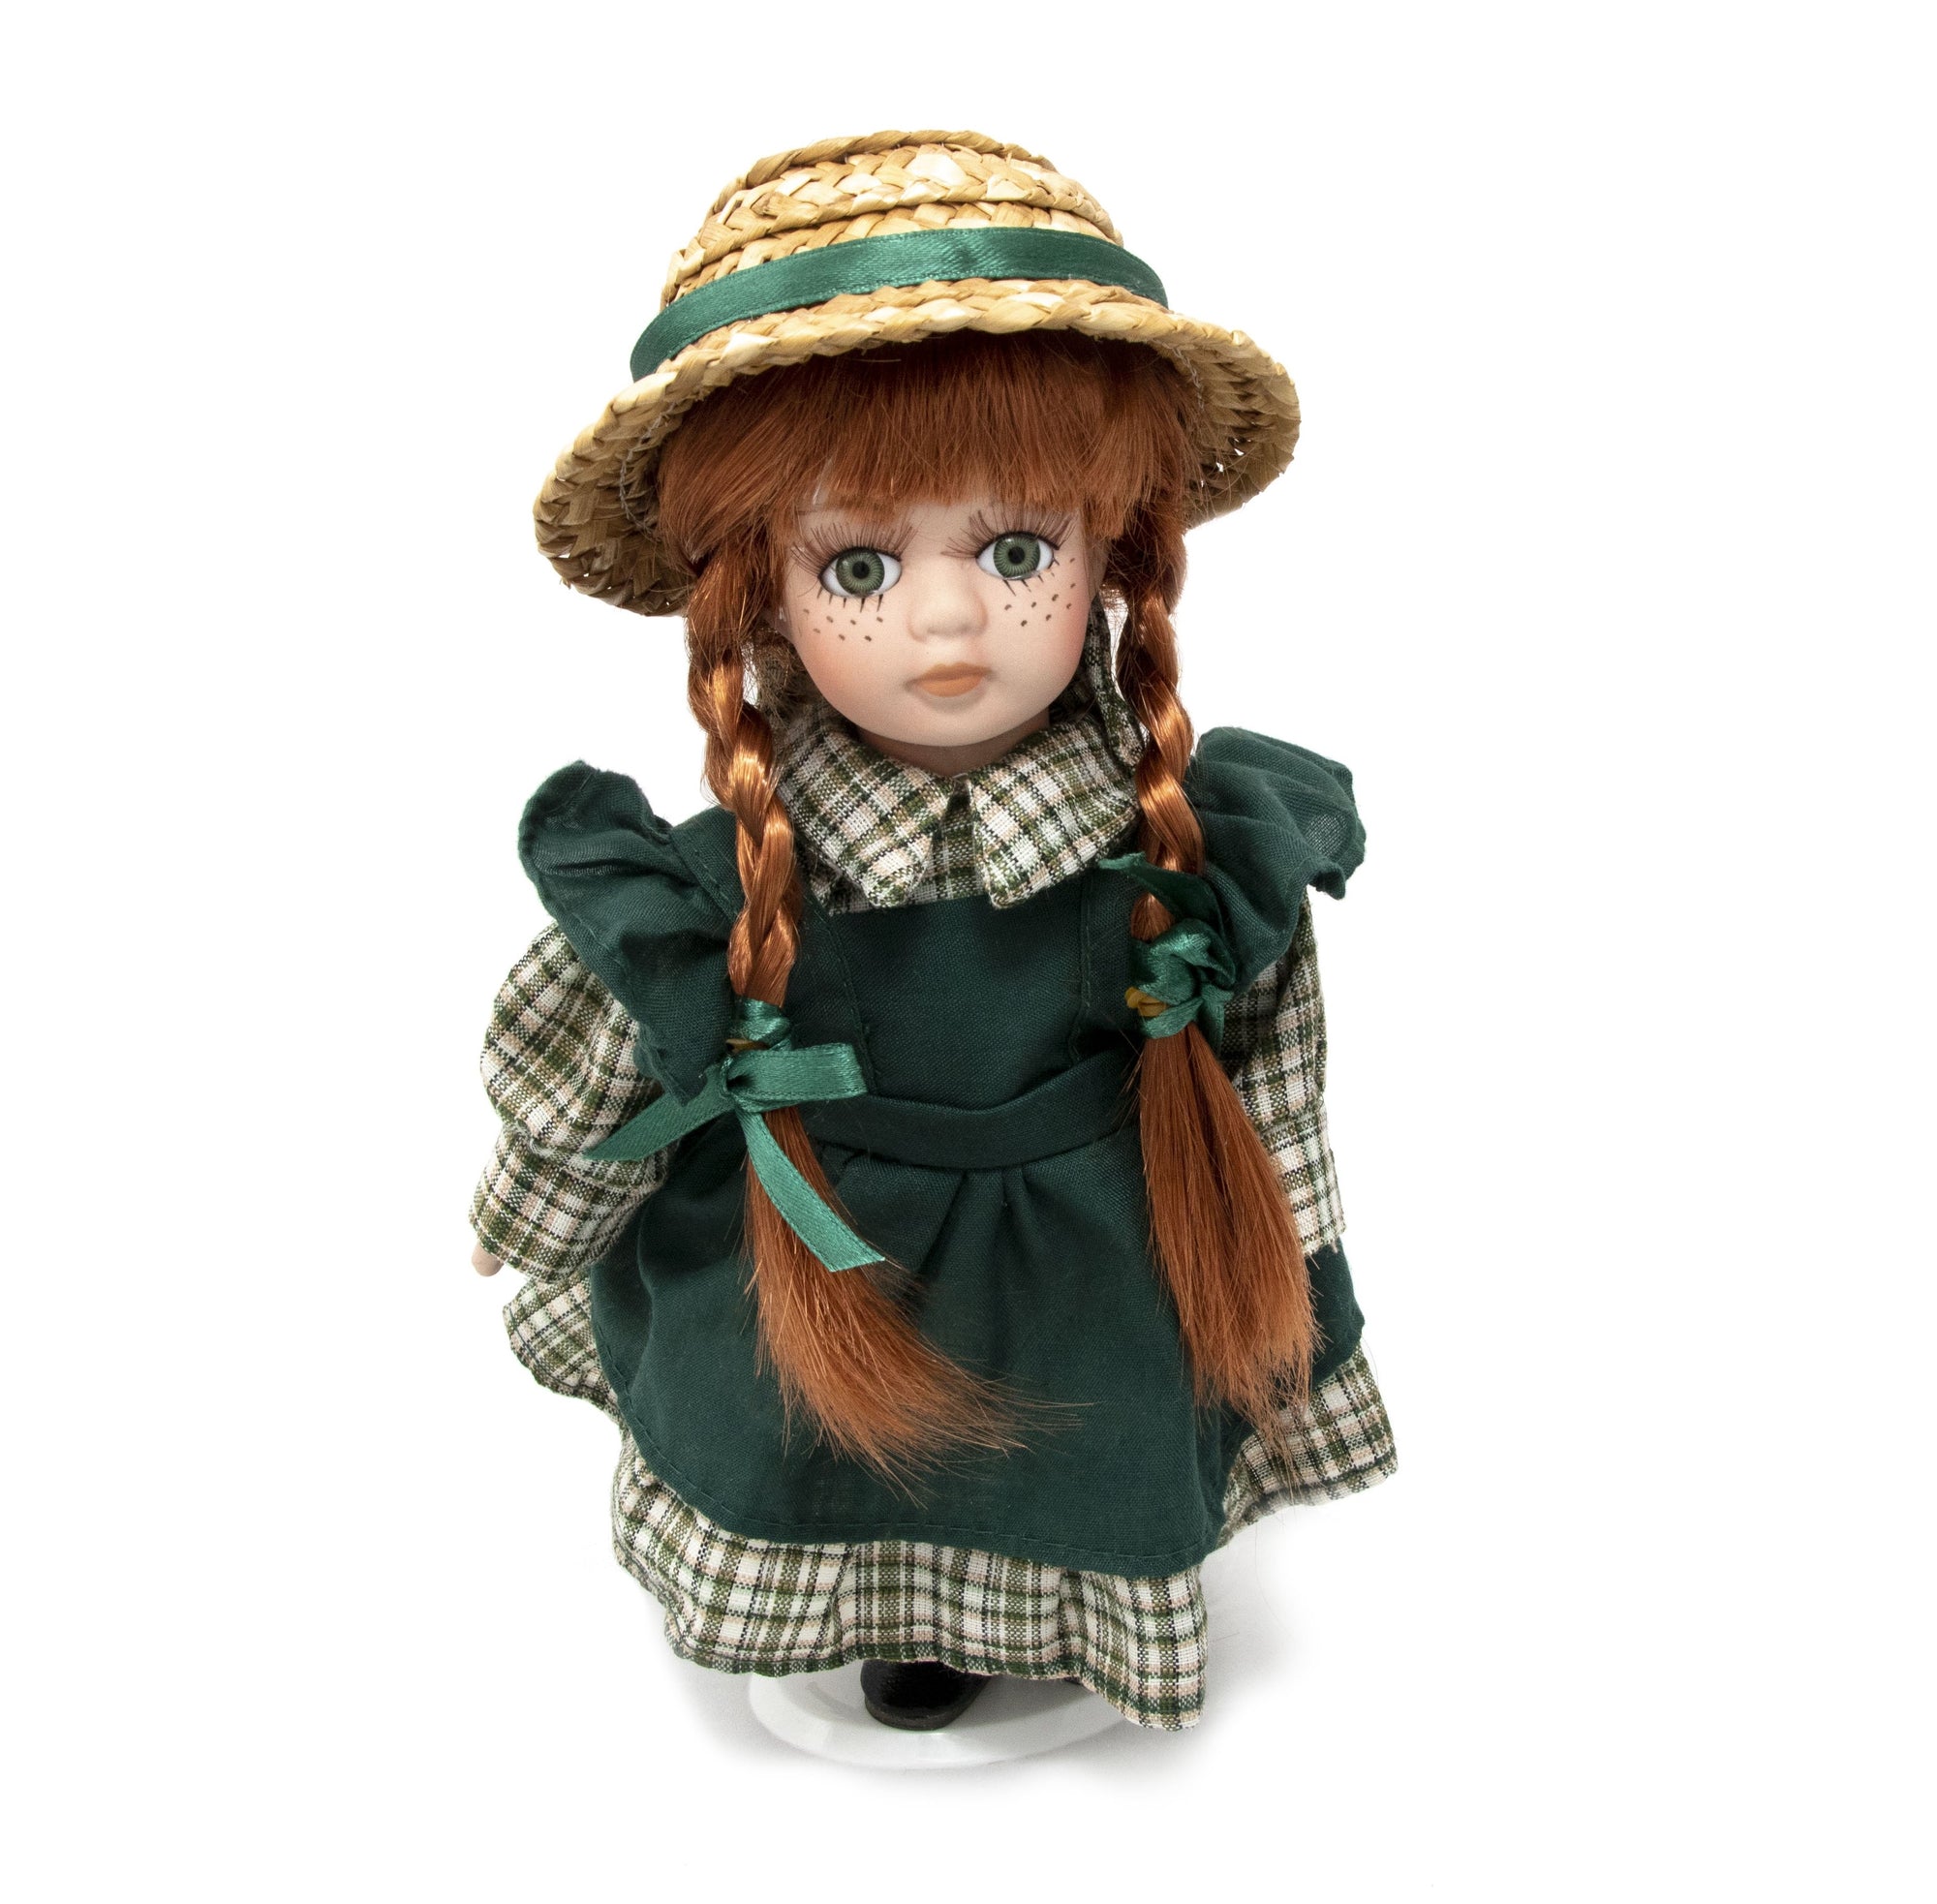 'Our Anne' 8 inch Porcelain Doll Anne Of Green Gables